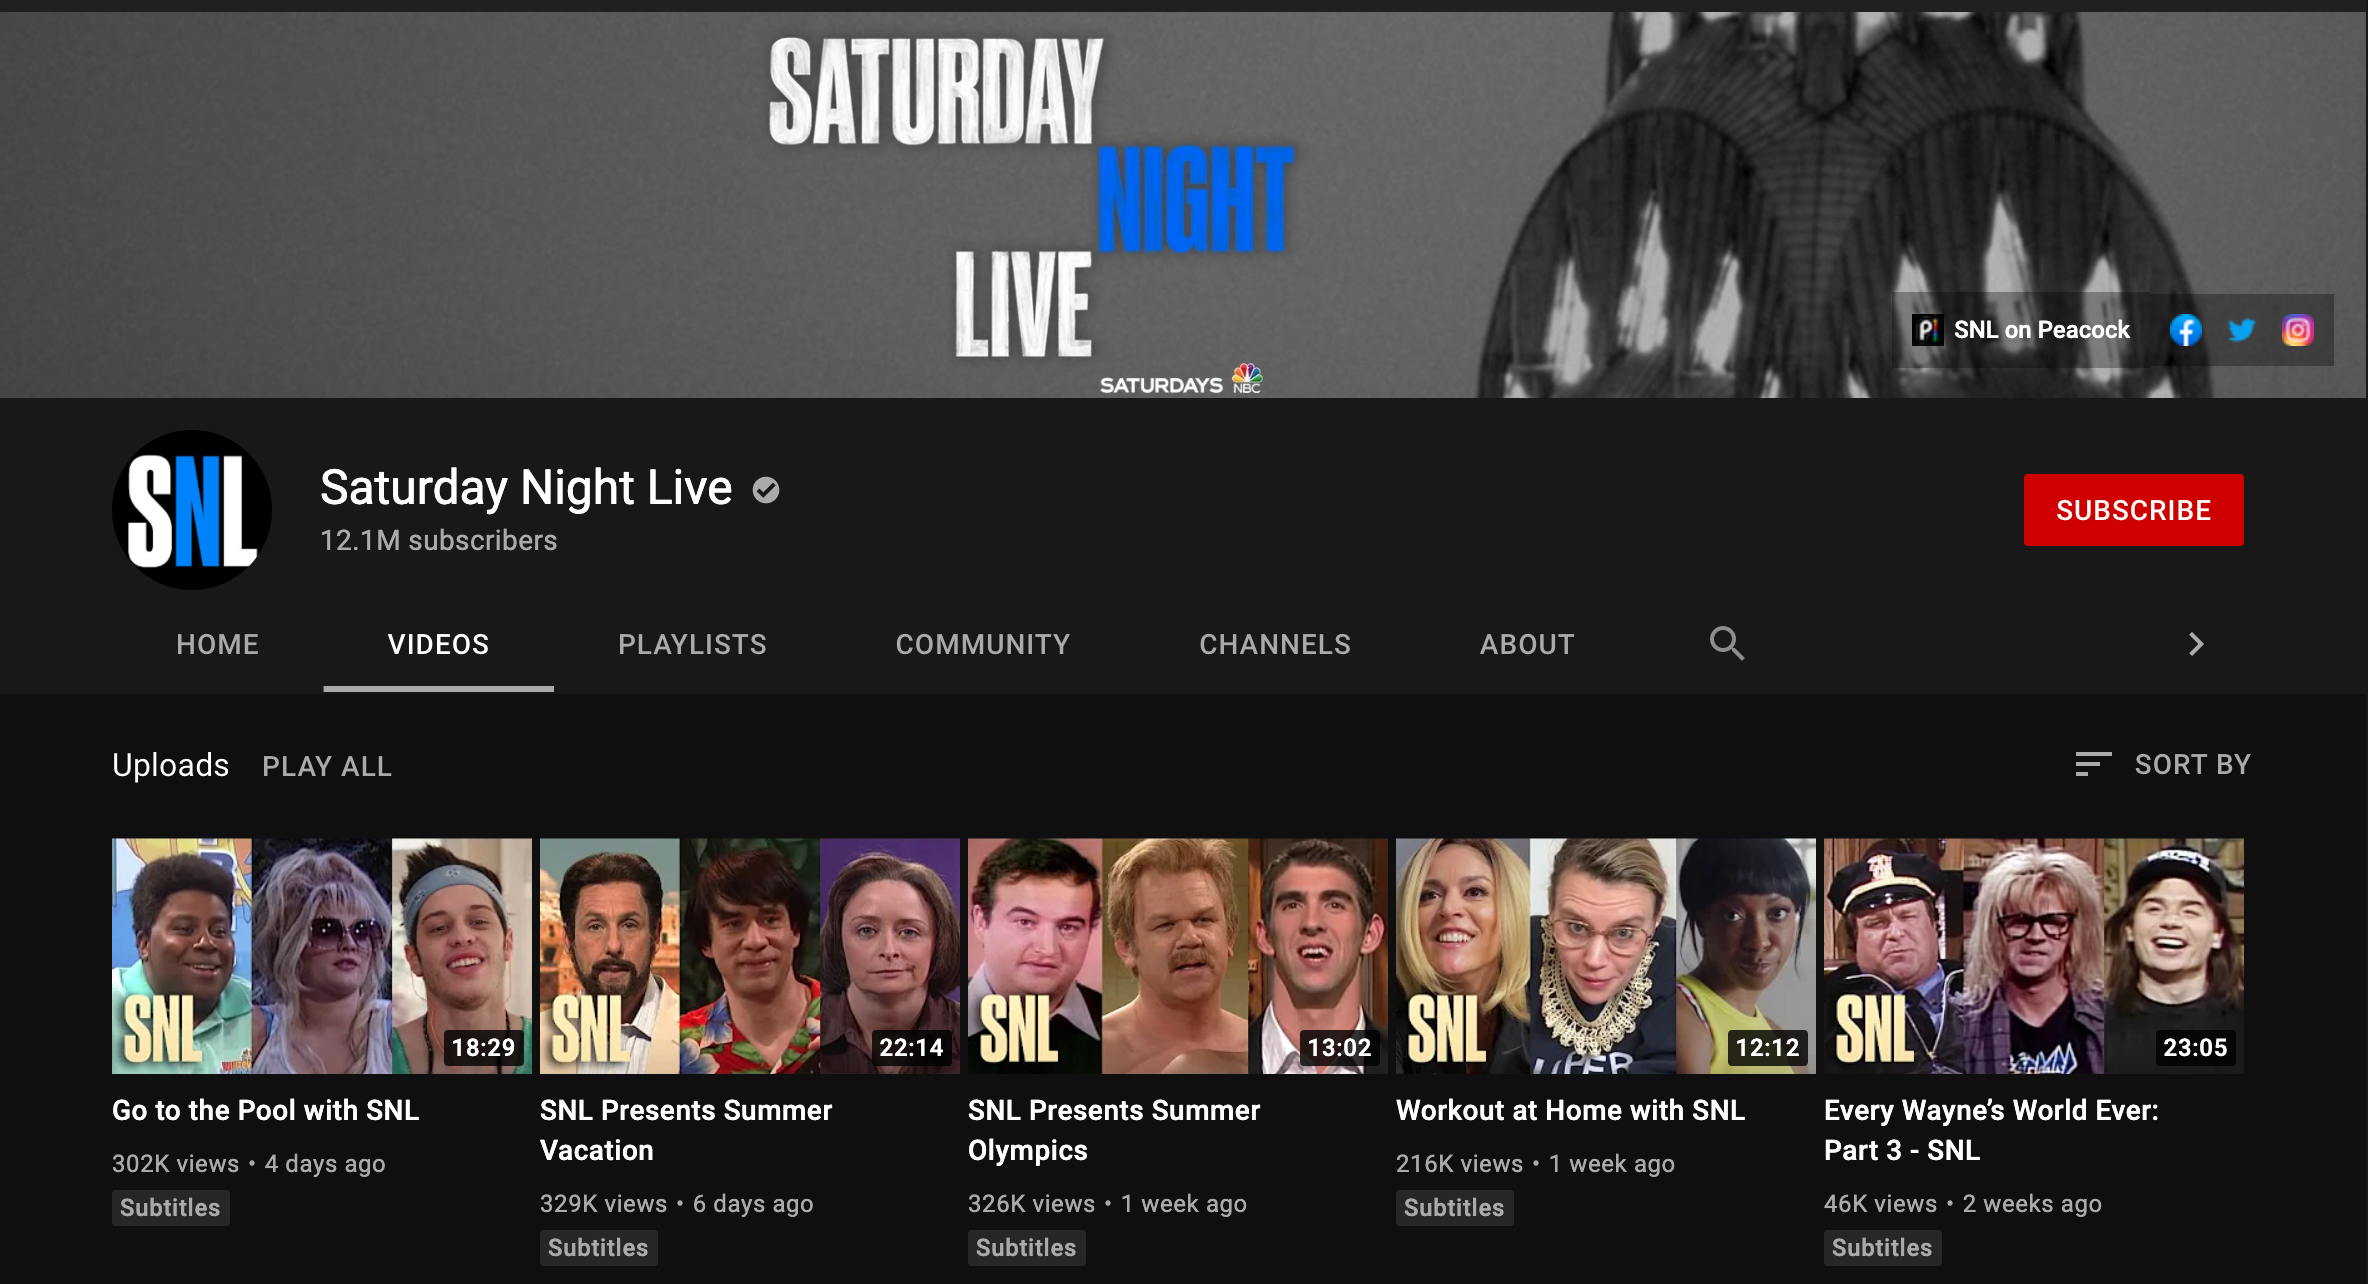 Way more videos on SNL USA YouTube